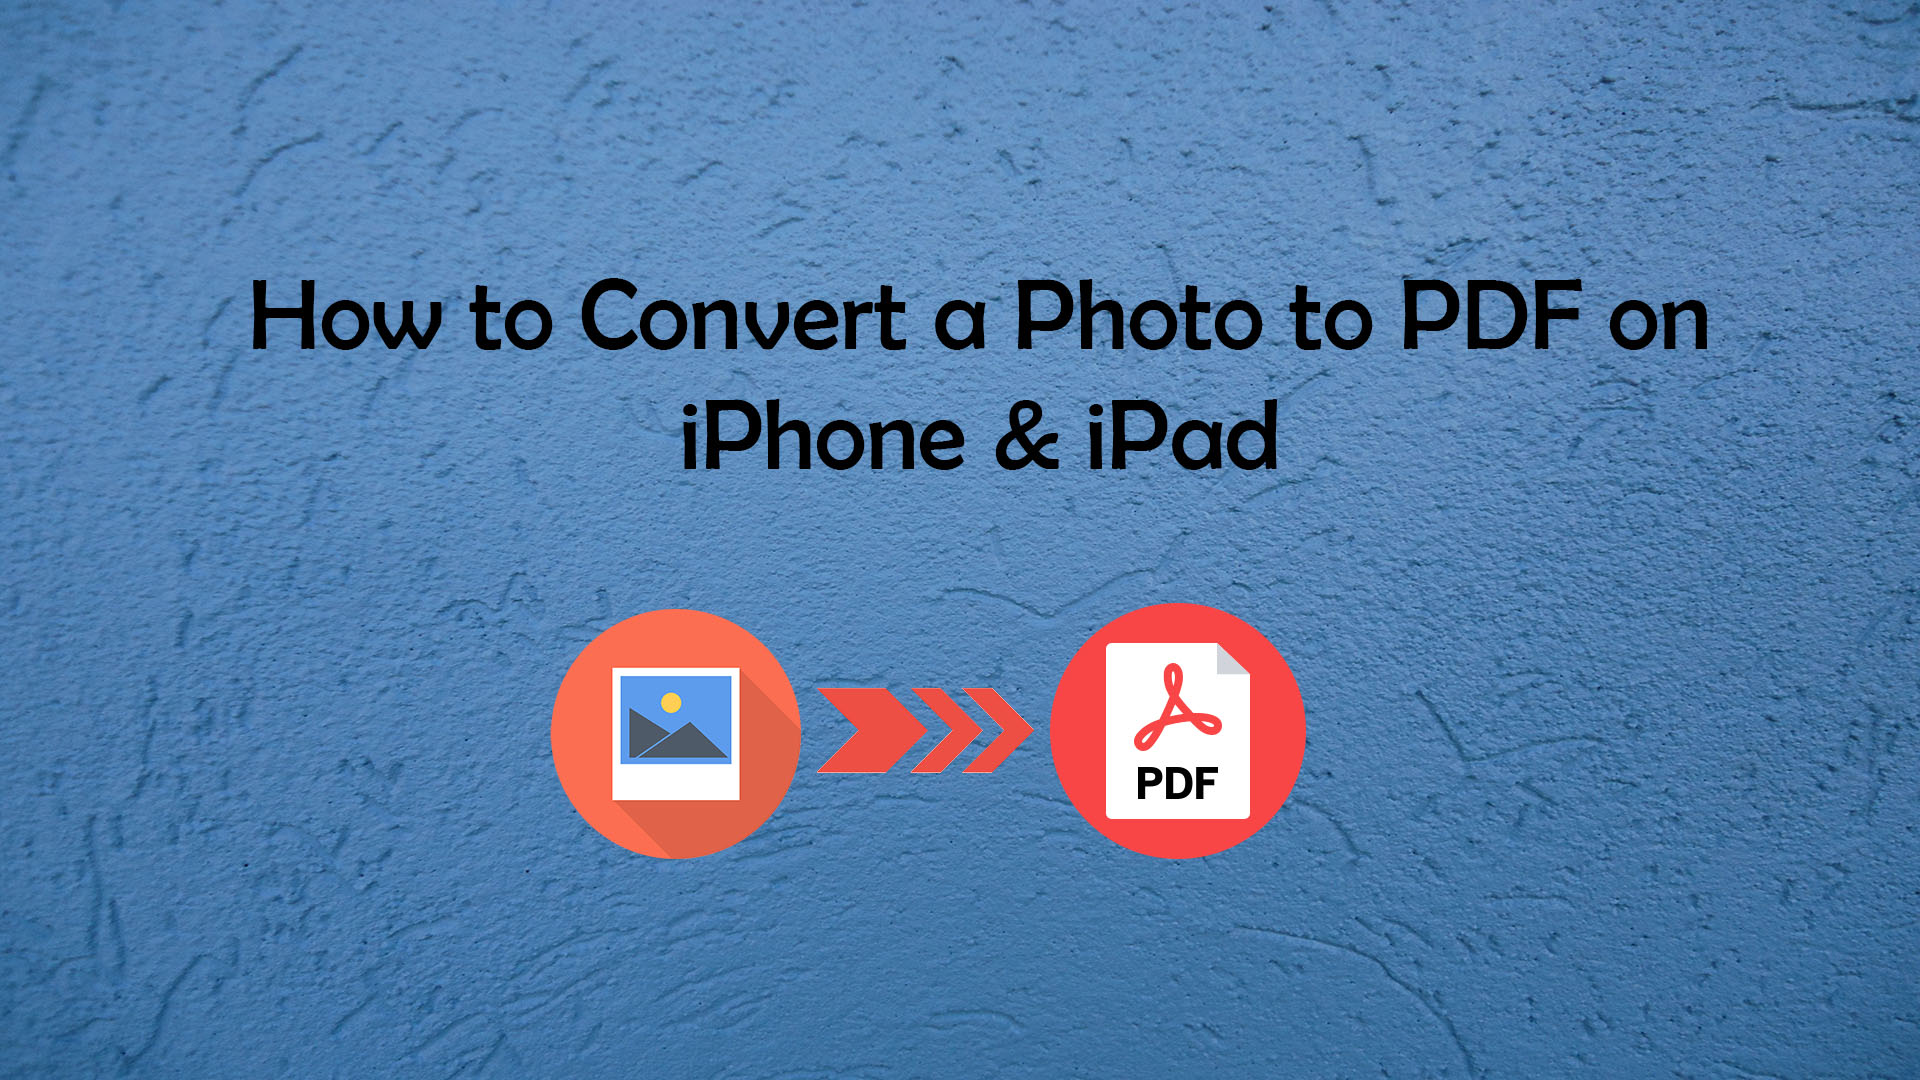 How to convert a photo to PDF on iPhone